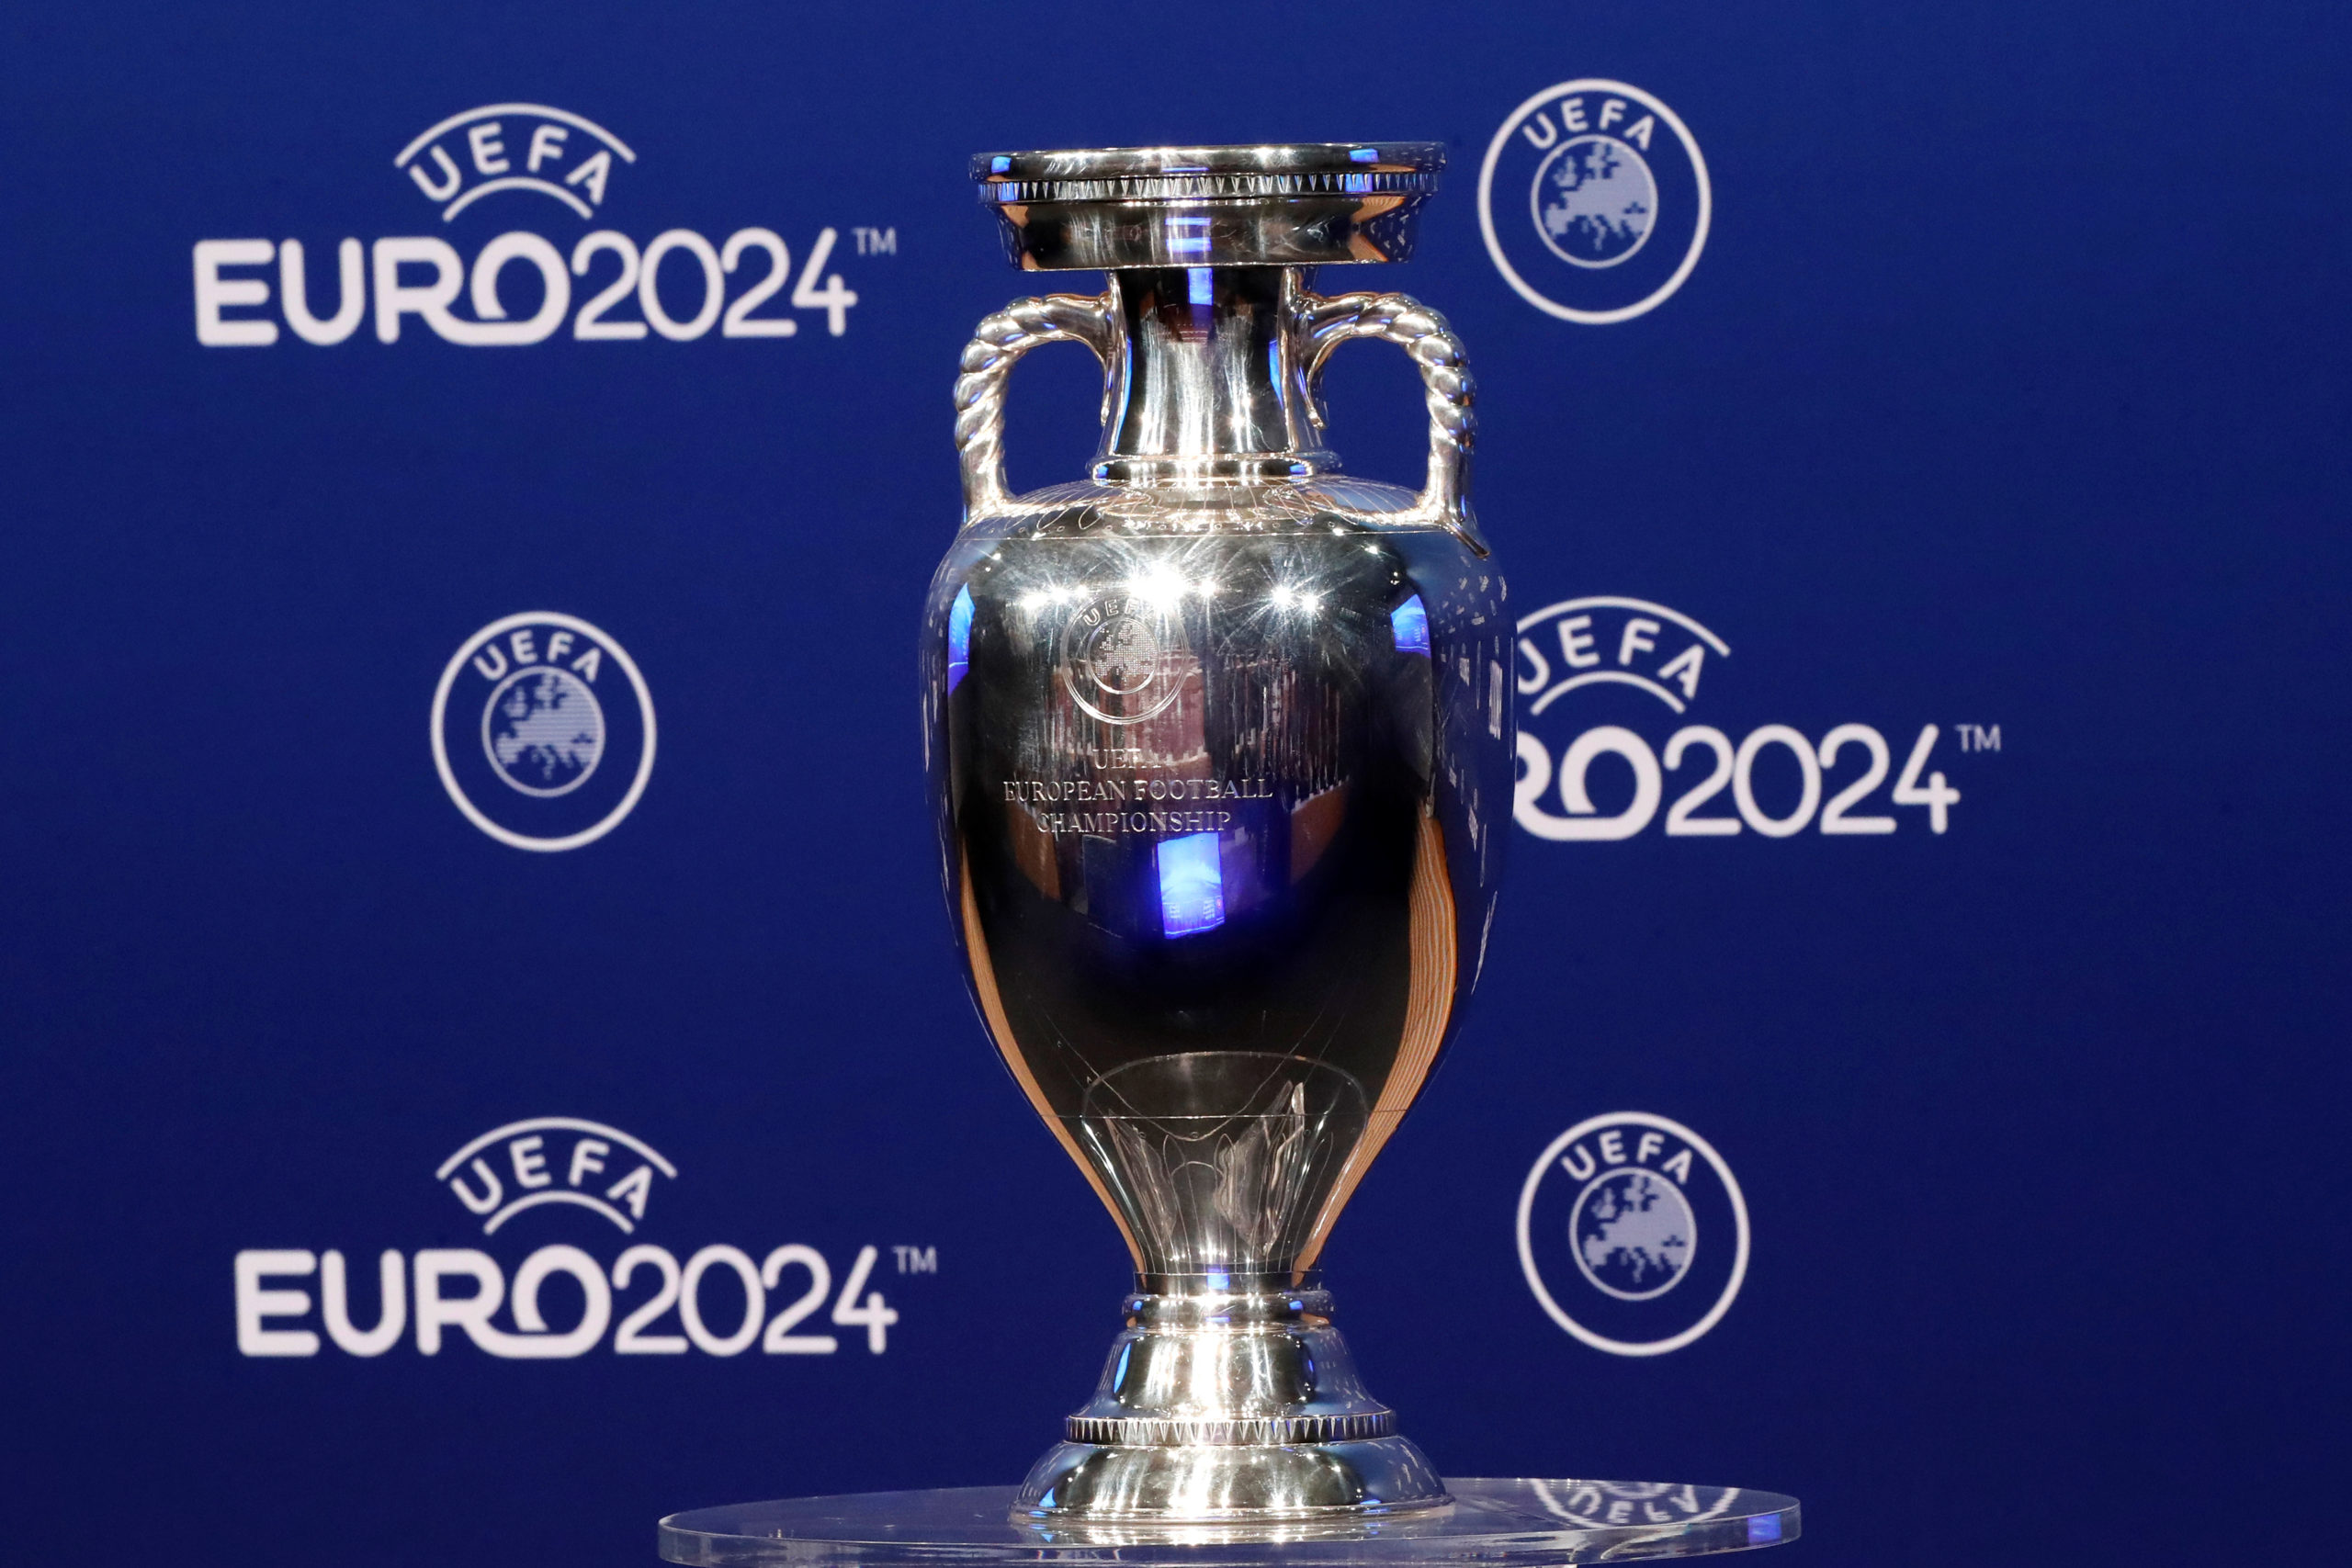 FILE PHOTO: Soccer Football - Euro 2024 Host Announcement - Nyon, Switzerland - September 27, 2018   The UEFA European Championship trophy on display ahead of the announcement   